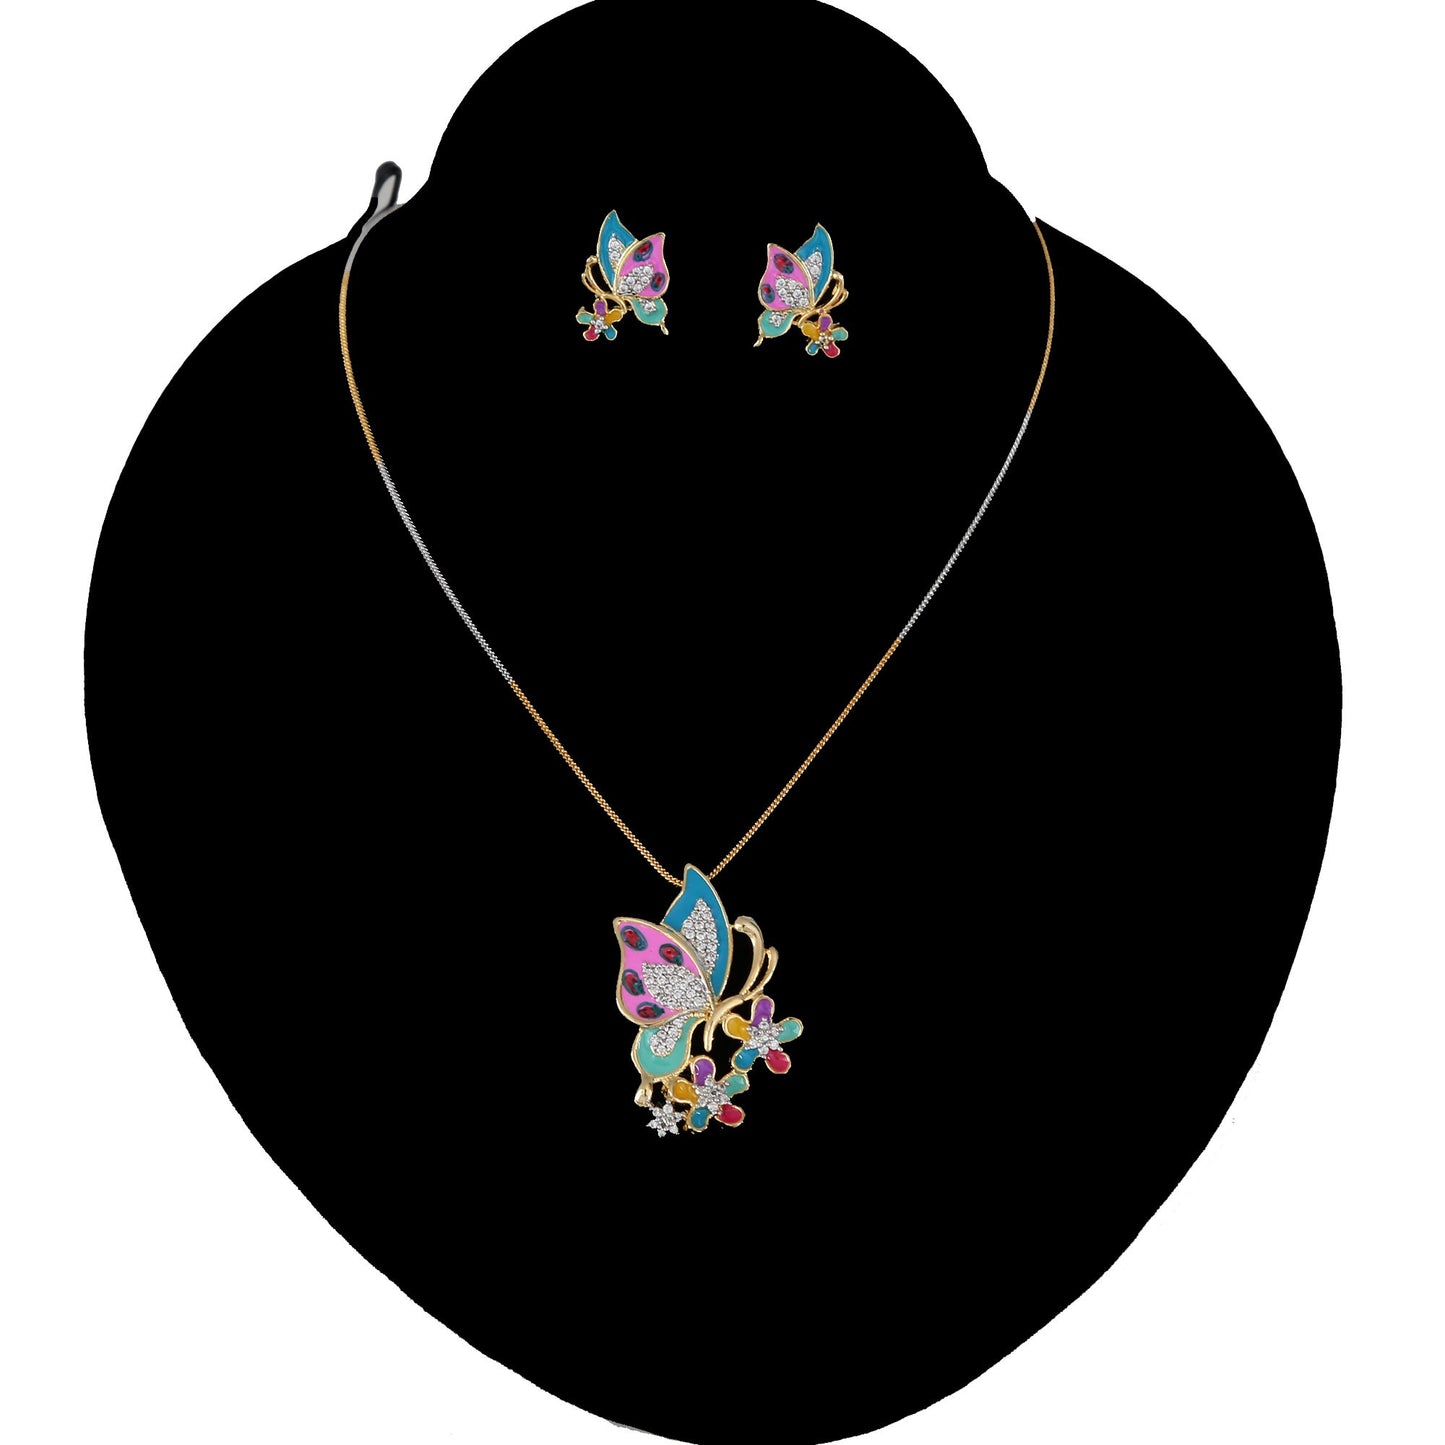 My Daily Use gold tone Dancing butterfly pendant earring set |New Fashion Butterfly Crystal Jewelry|CZ butterfly fashion women necklace